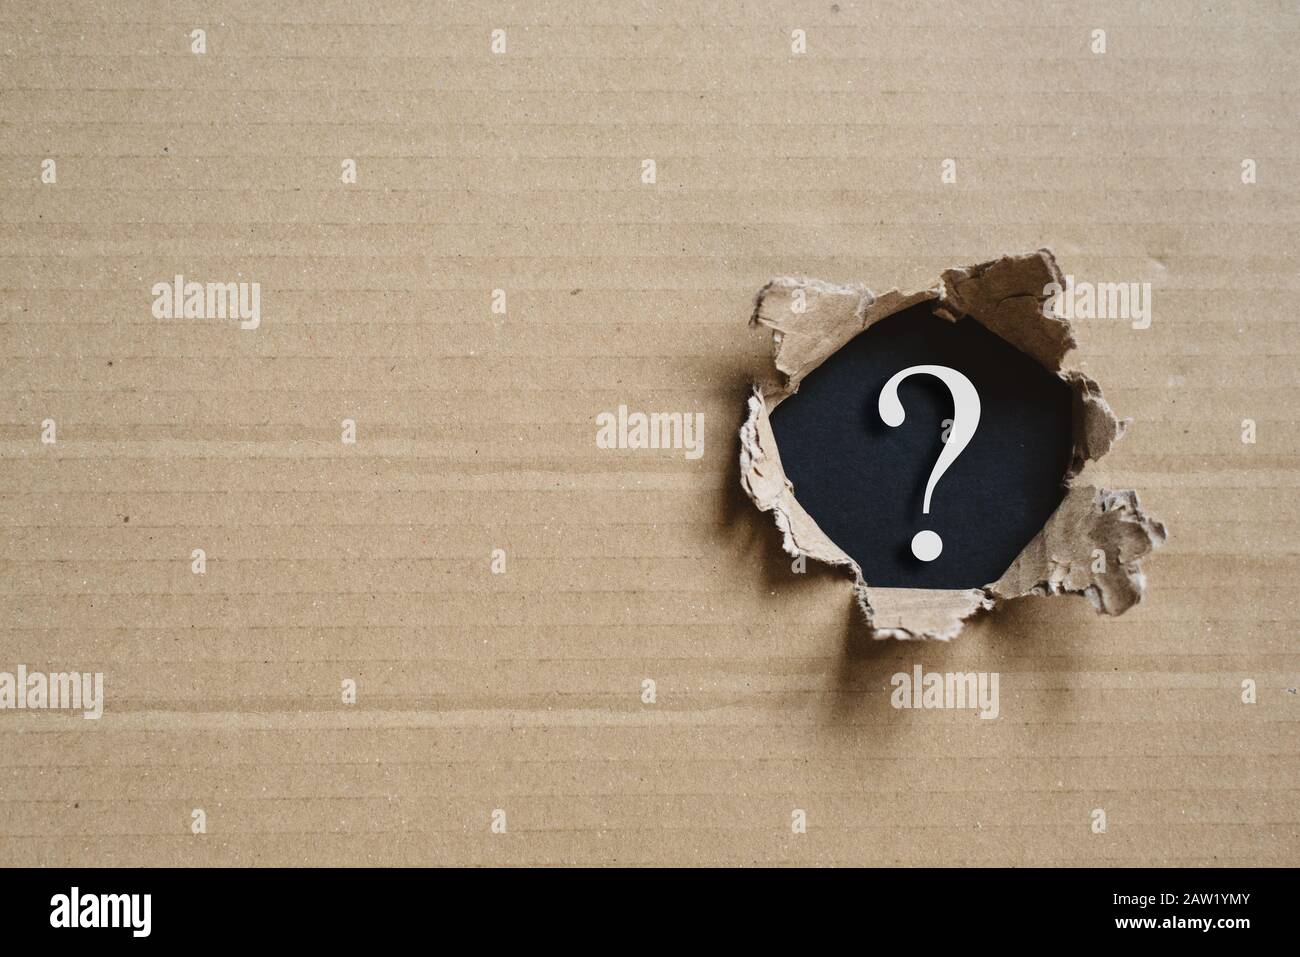 Torned corrugated box revealing question mark. Concept of mystery and uncertainty Stock Photo